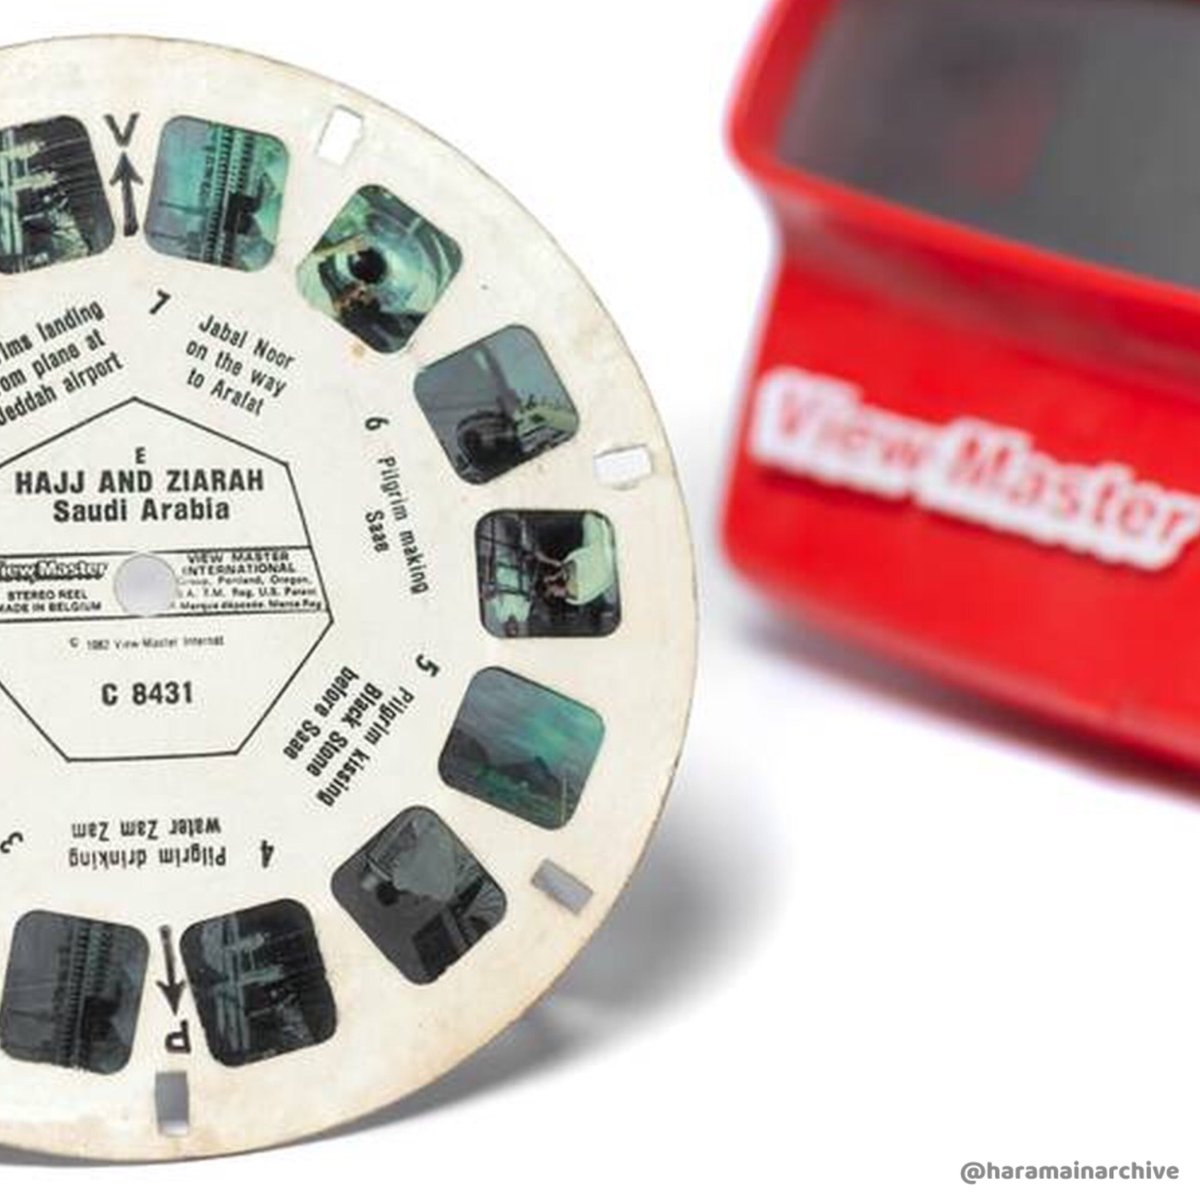 A classic toy / souvenir that our parents and grandparents would bring home from Makkah & Madinah. 

The young followers won’t know how sentimental this item was. 🙂

#90skid #nostalgia #viewmaster #toys 
#umrah #hajj